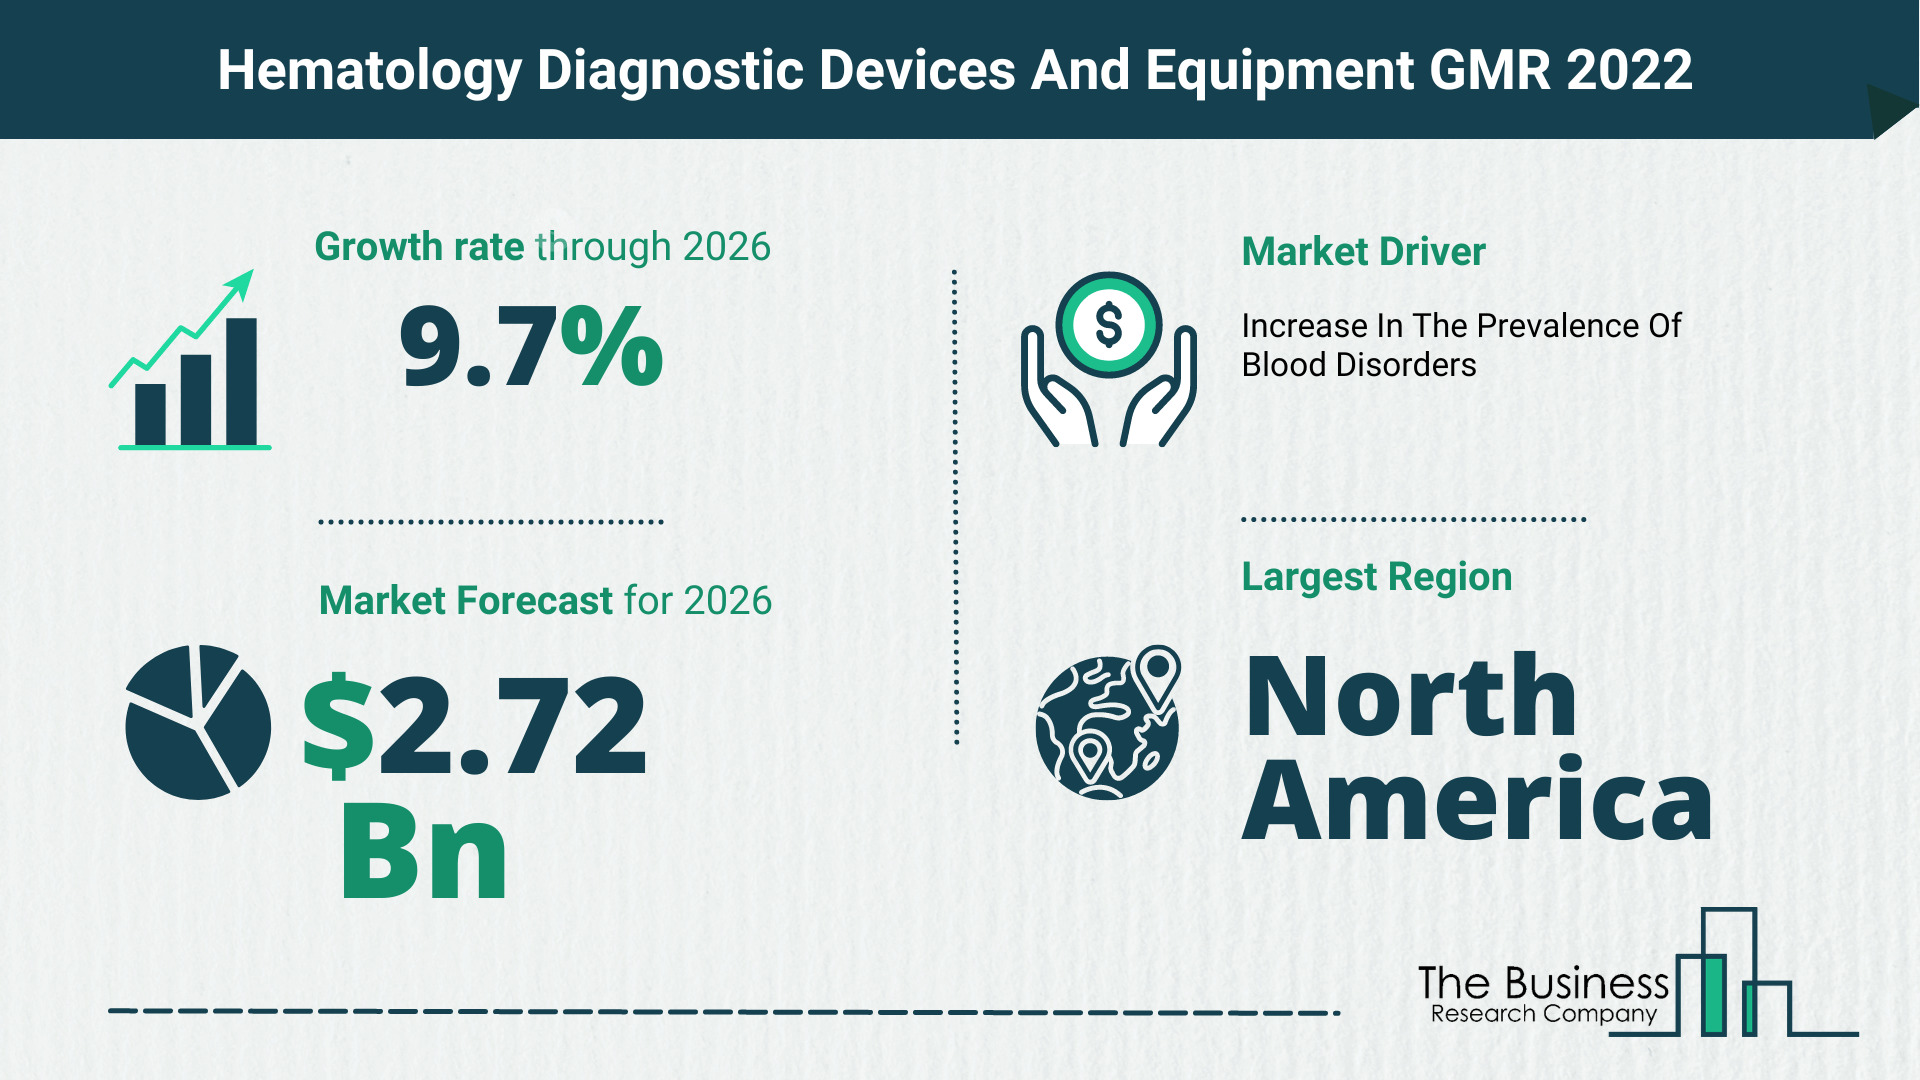 Global Hematology Diagnostic Devices And Equipment Market